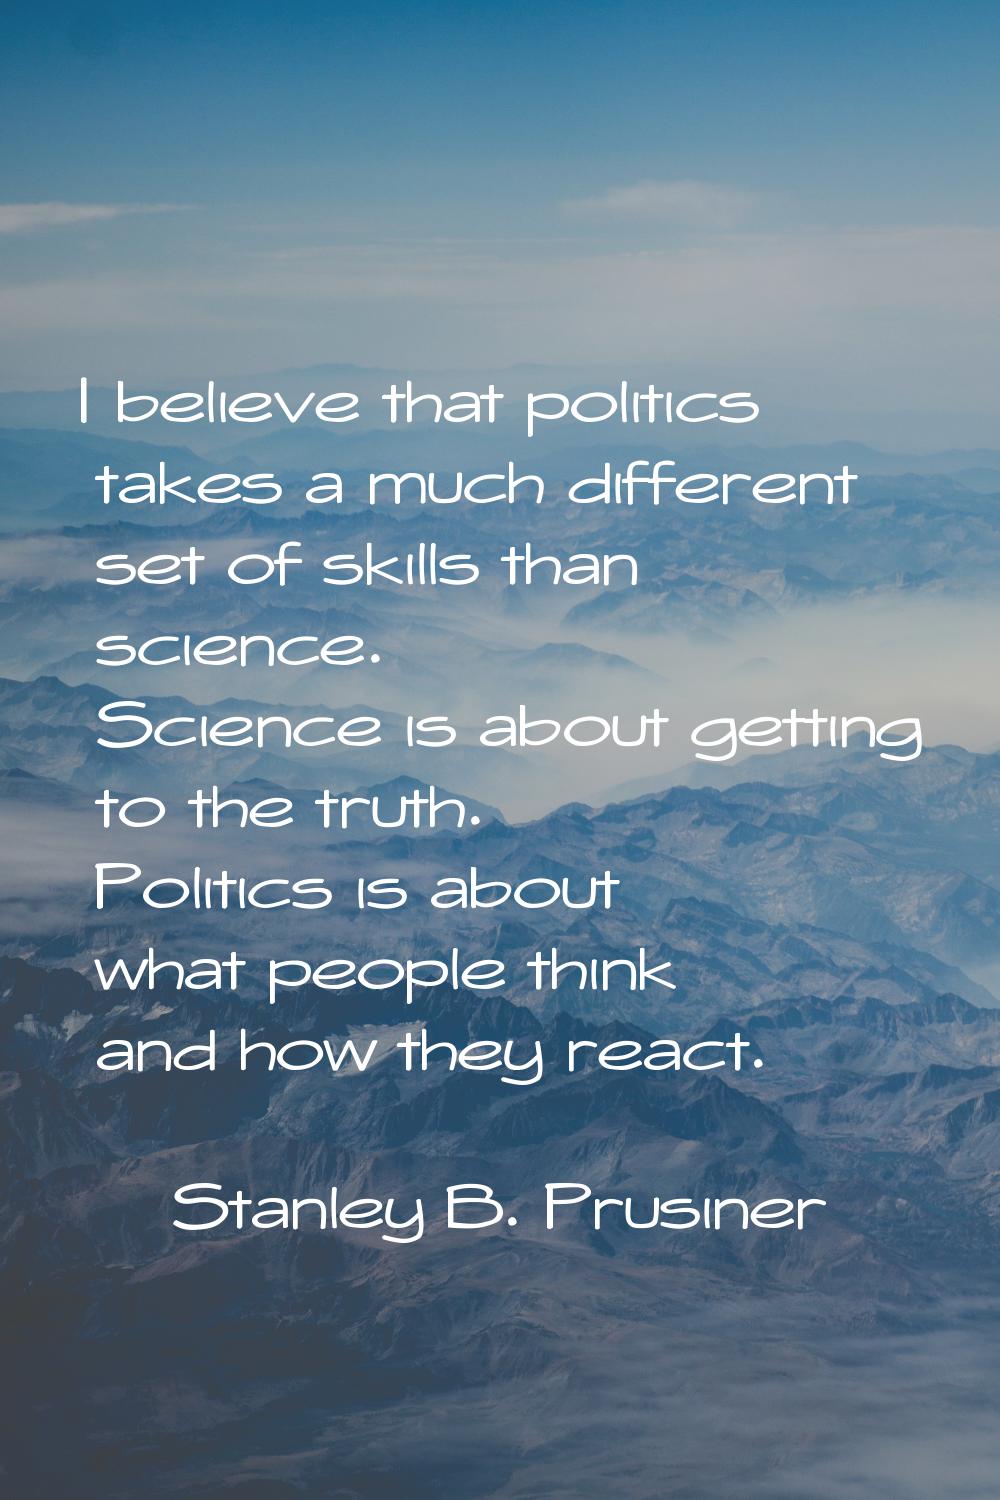 I believe that politics takes a much different set of skills than science. Science is about getting